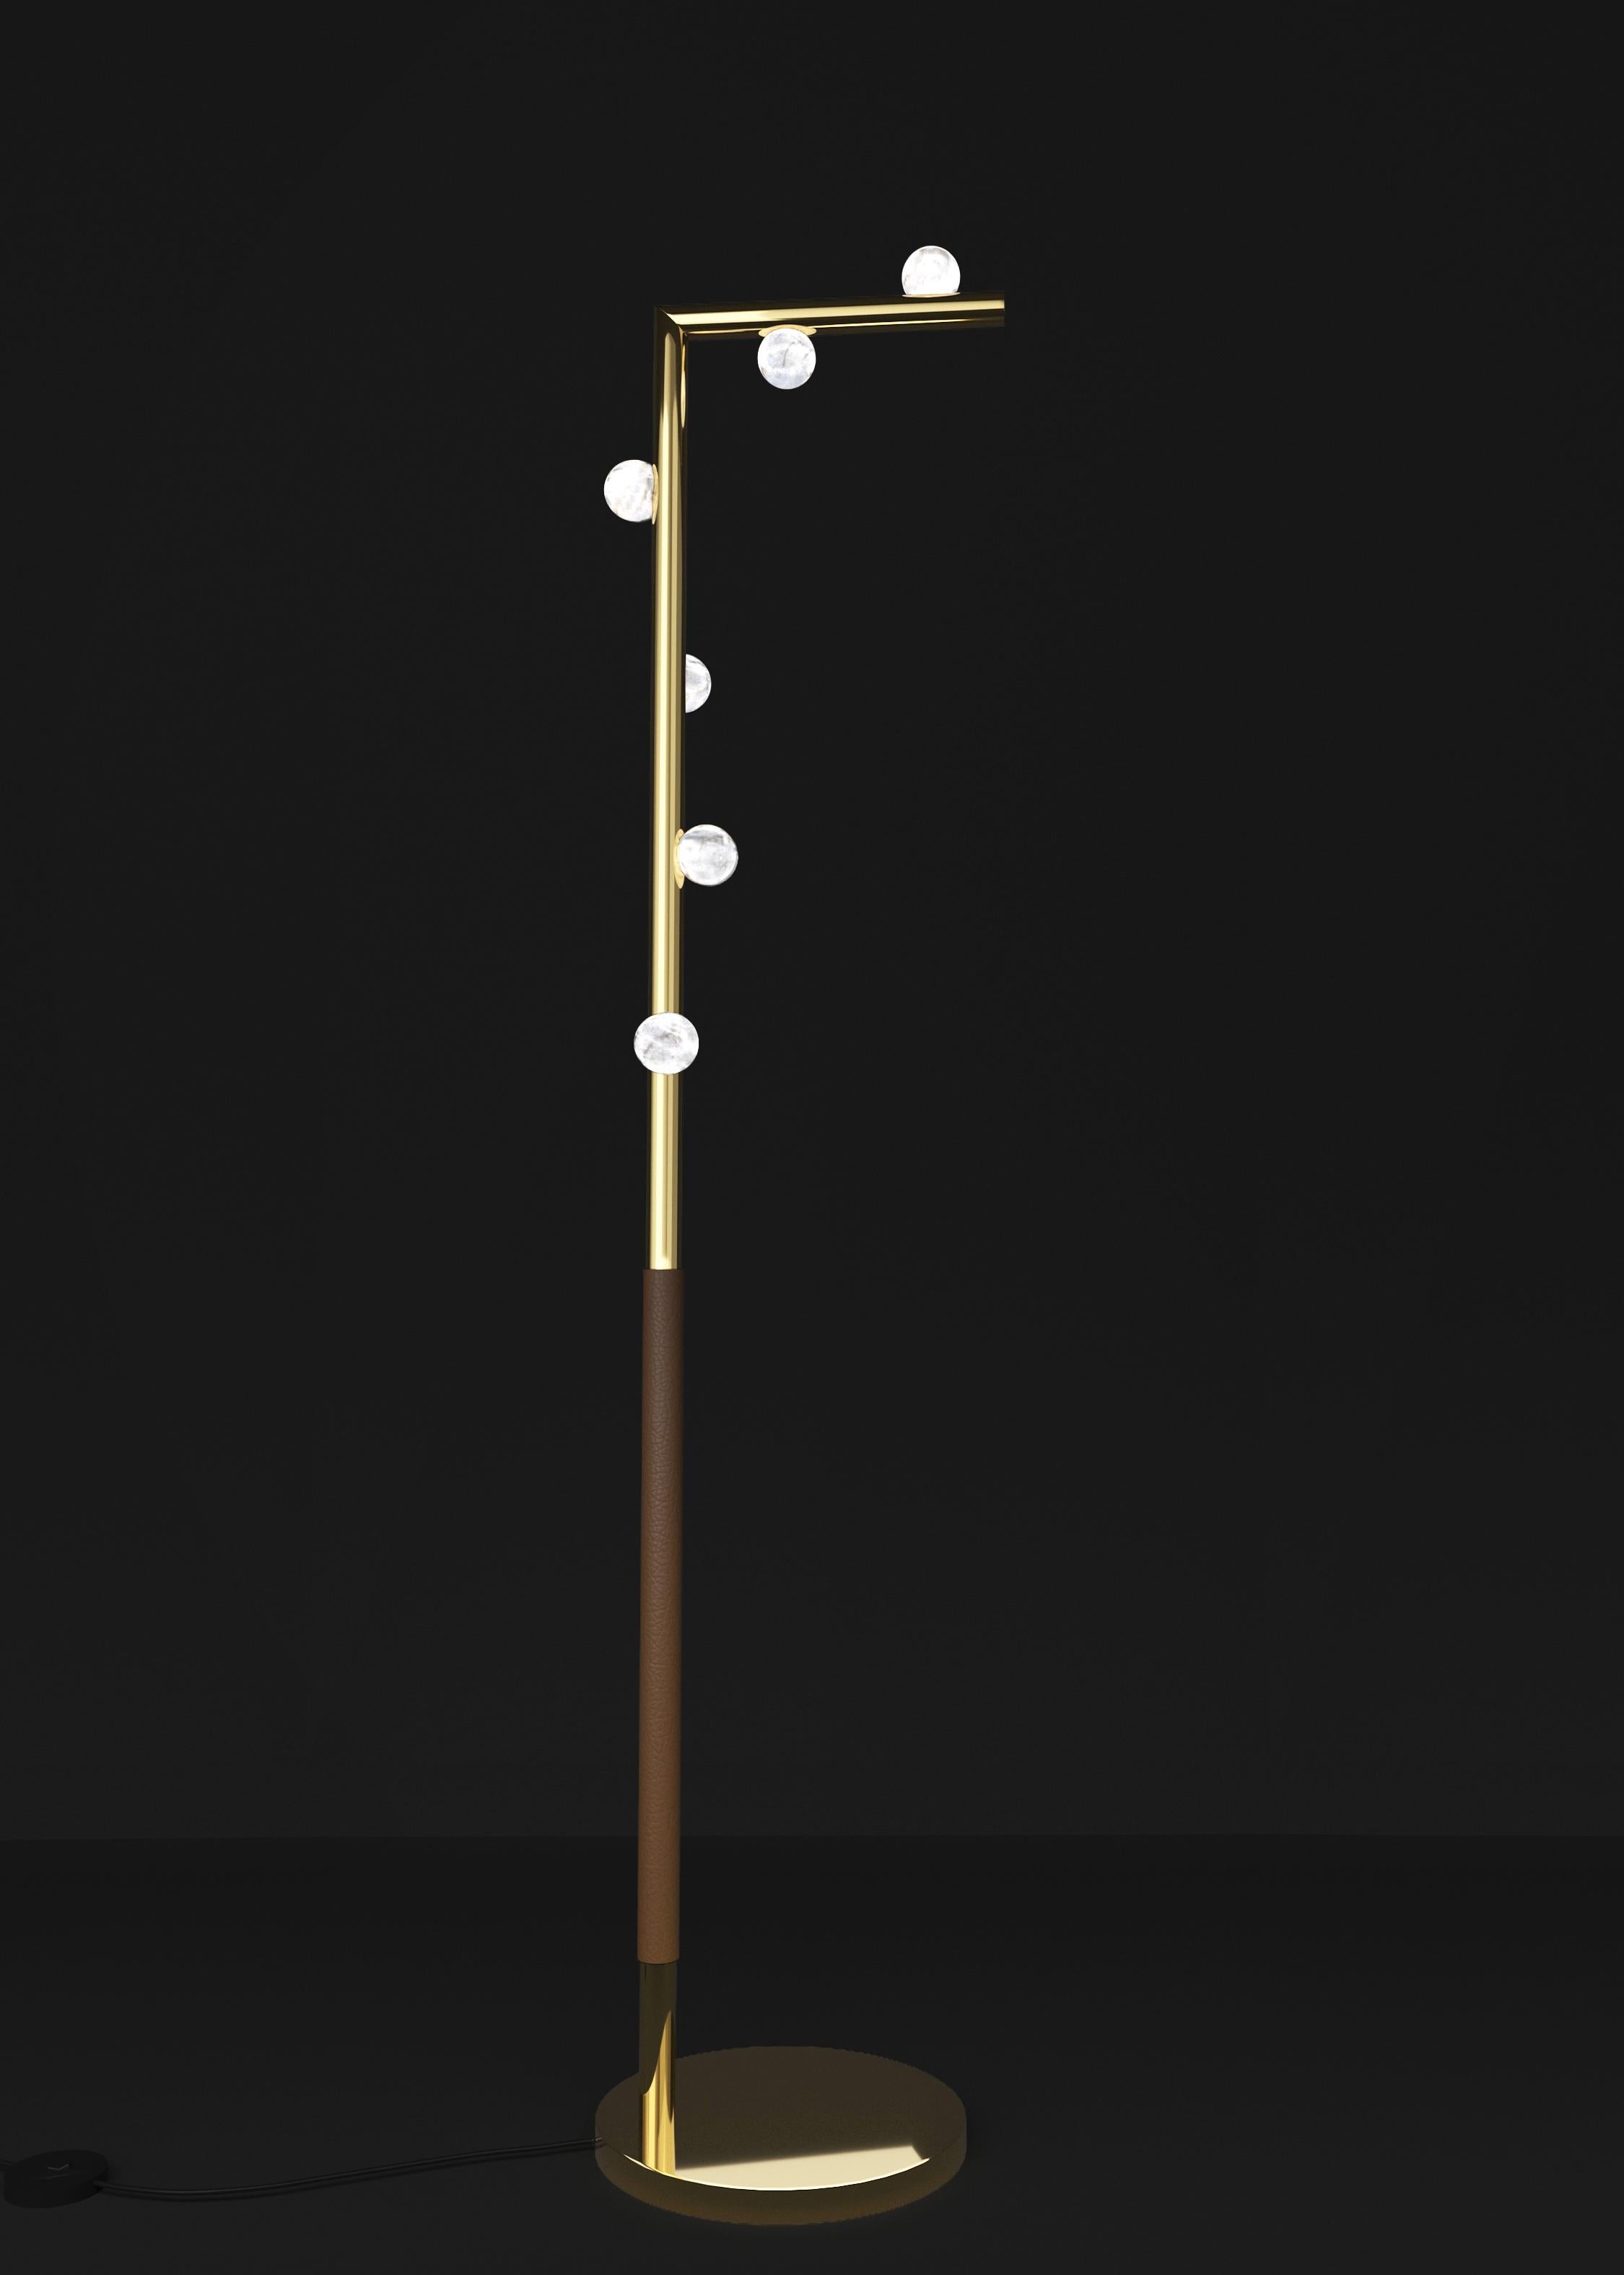 Demetra Shiny Gold Metal Floor Lamp by Alabastro Italiano
Dimensions: D 30 x W 37 x H 158 cm.
Materials: White alabaster, metal and leather.

Available in different finishes: Shiny Silver, Bronze, Brushed Brass, Ruggine of Florence, Brushed